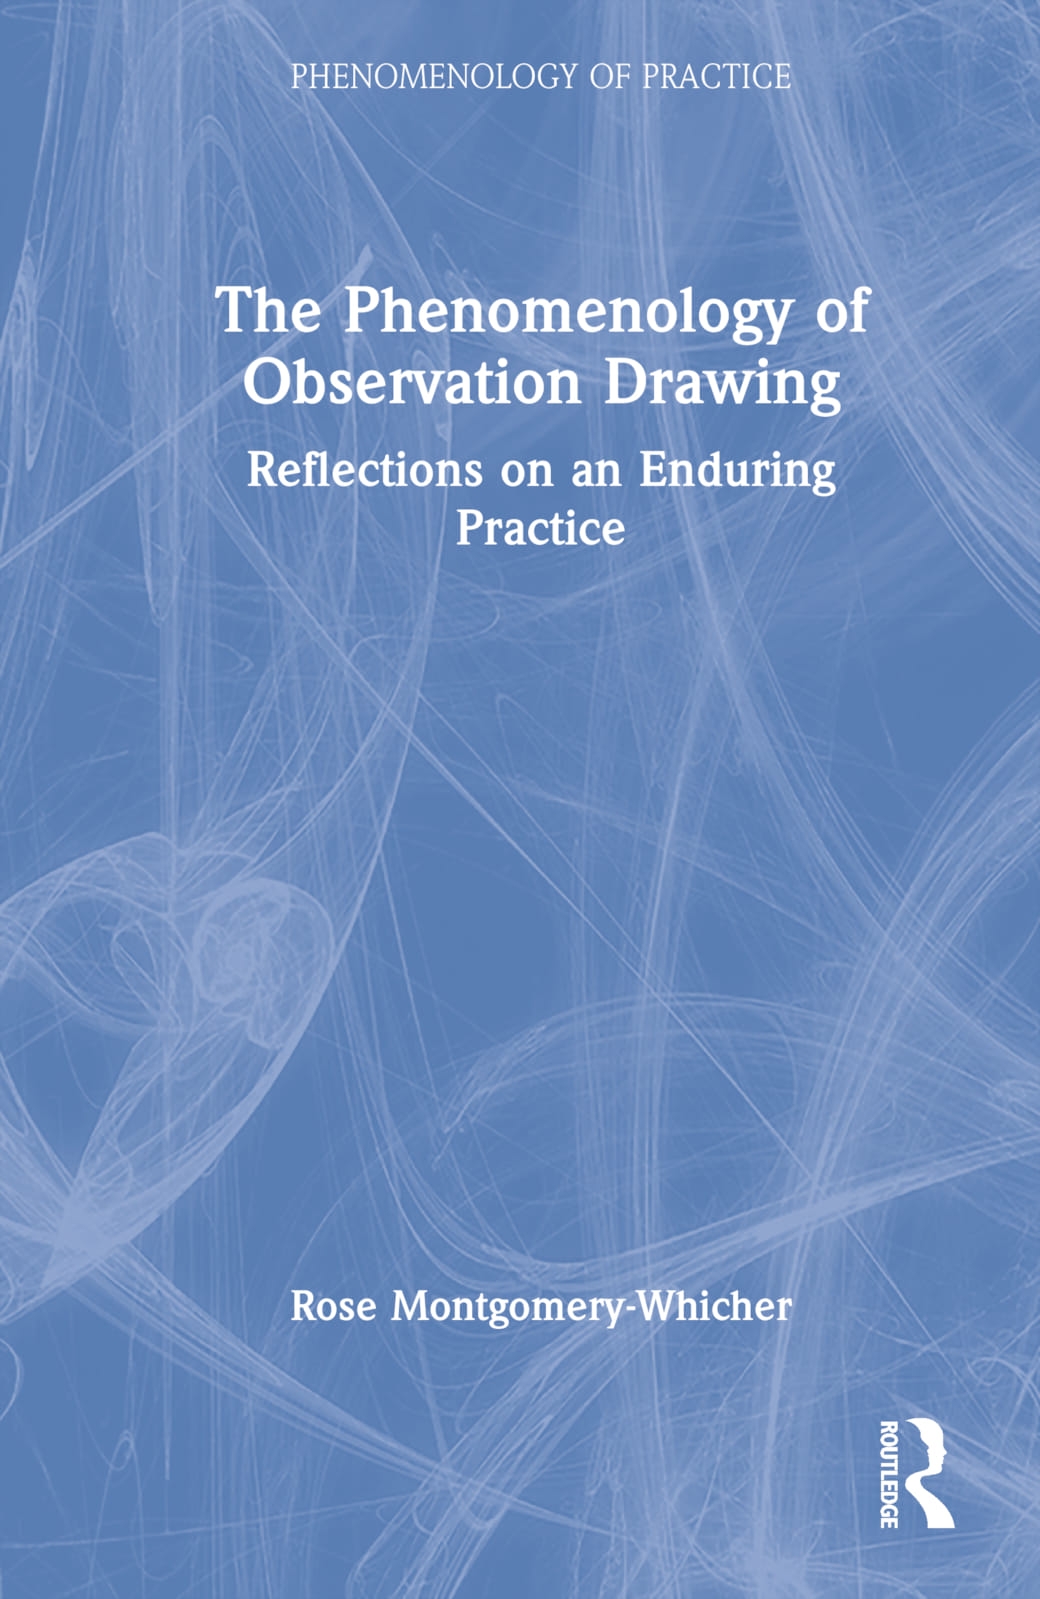 The Phenomenology of Observation Drawing: Reflections on an Enduring Practice